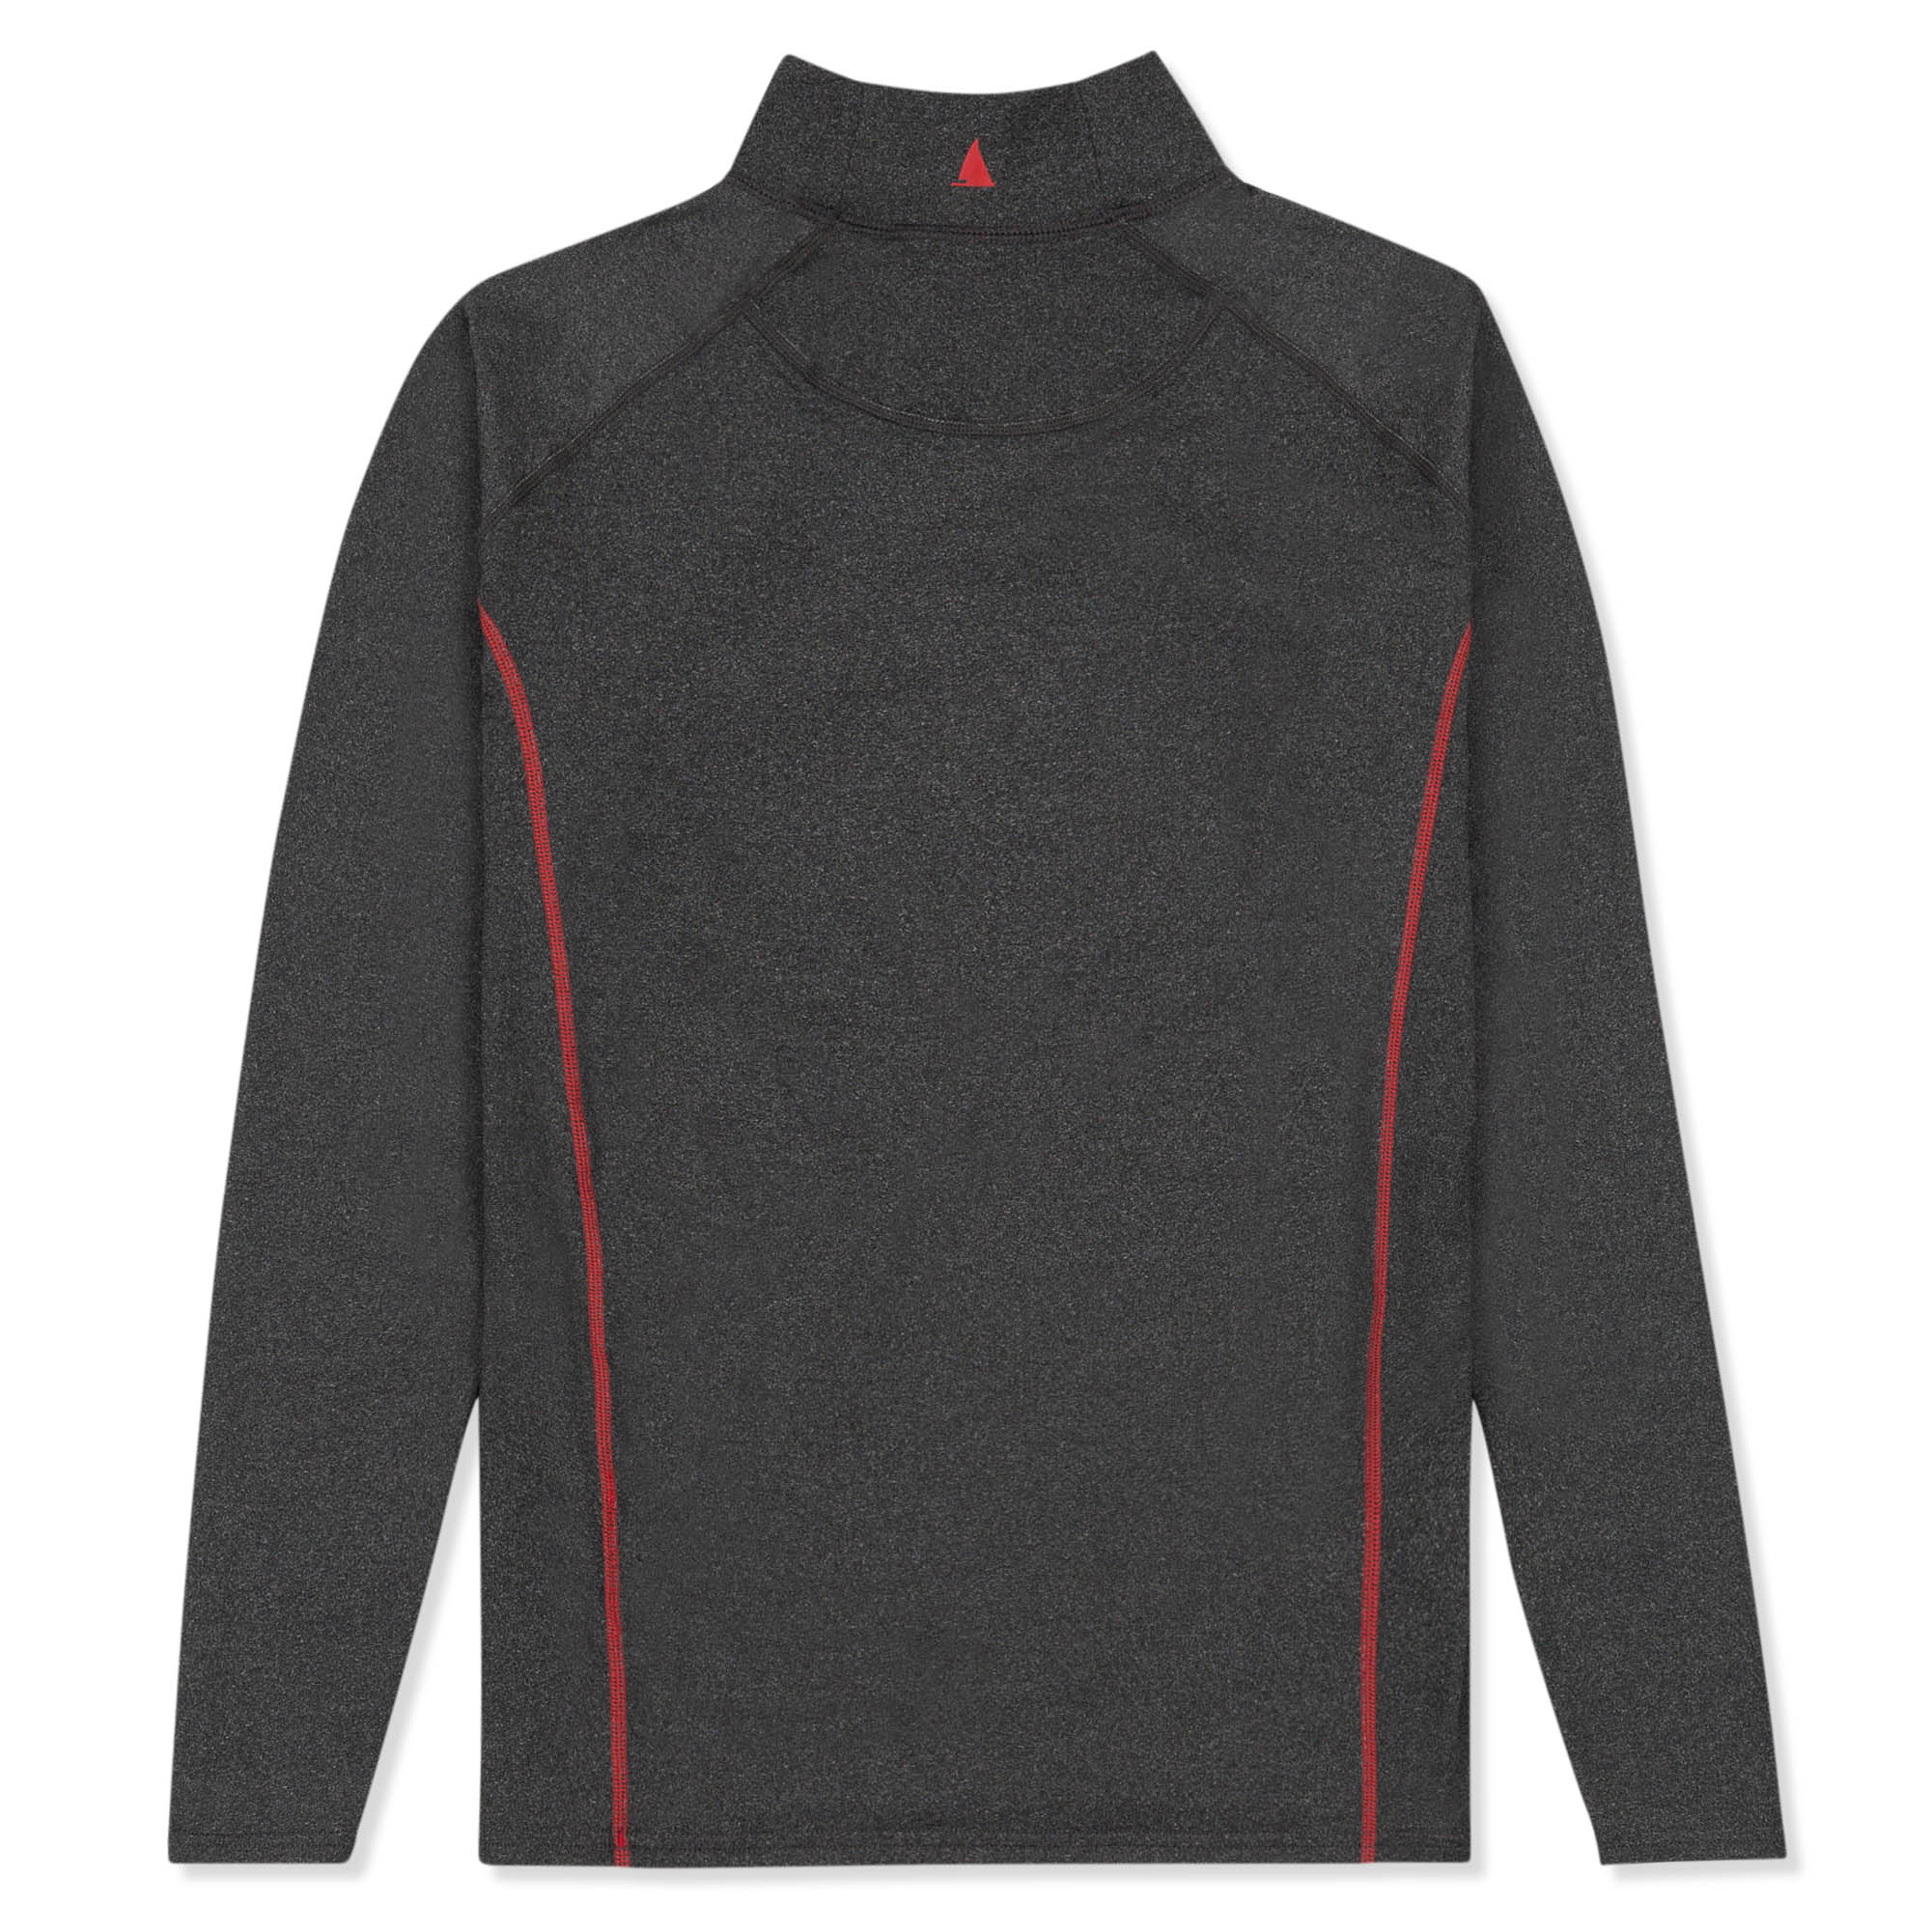 MUSTO - Thermal Base Layer Top